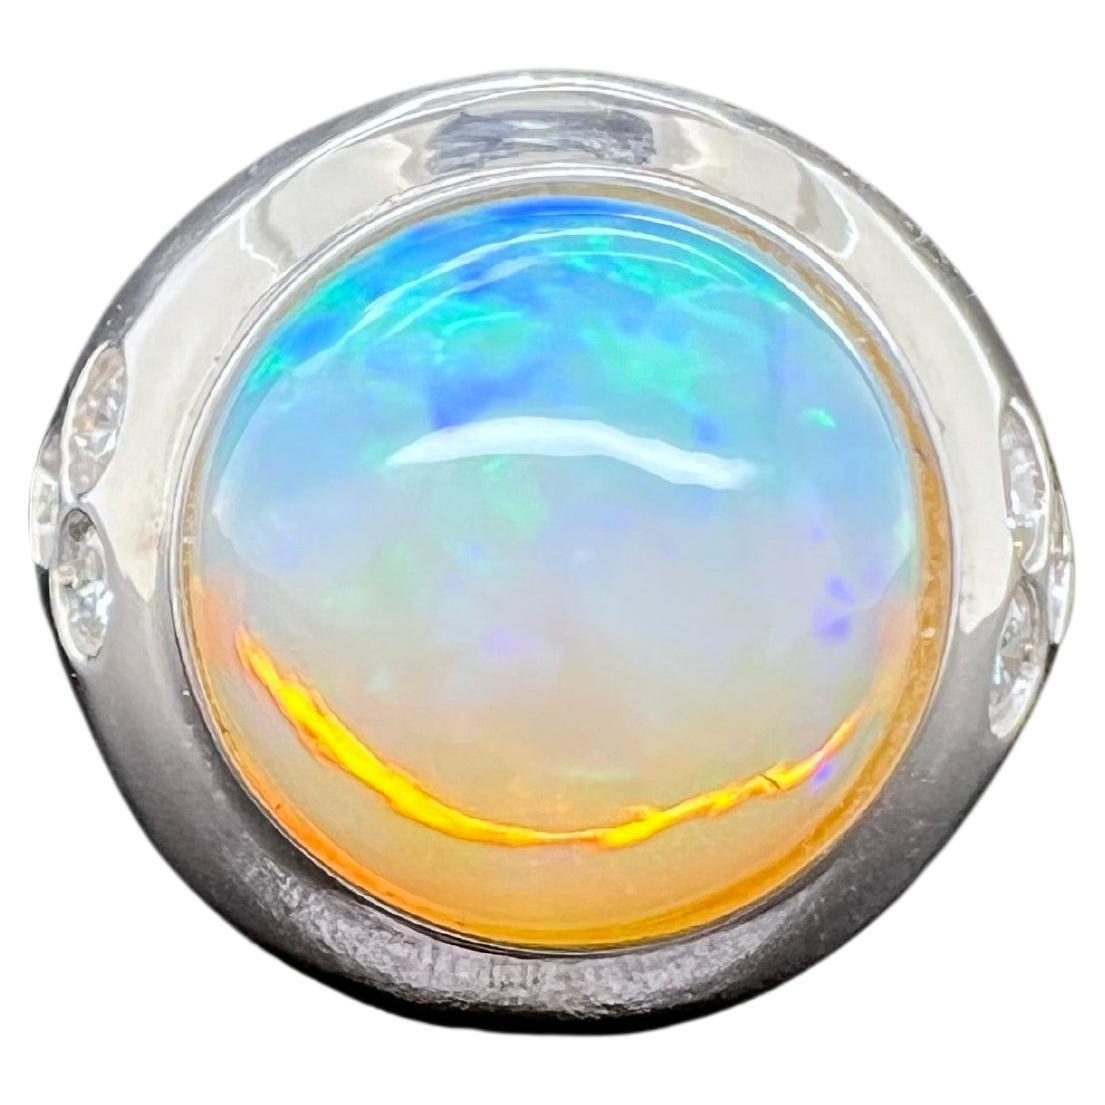 This stunning Ethiopian opal men's ring is a must have for any collection. The round opal glows with green, blue and yellow hues. The diamonds are inlayed on the sides to give a nice accent to the sleek ring. The overall design of the ring is made